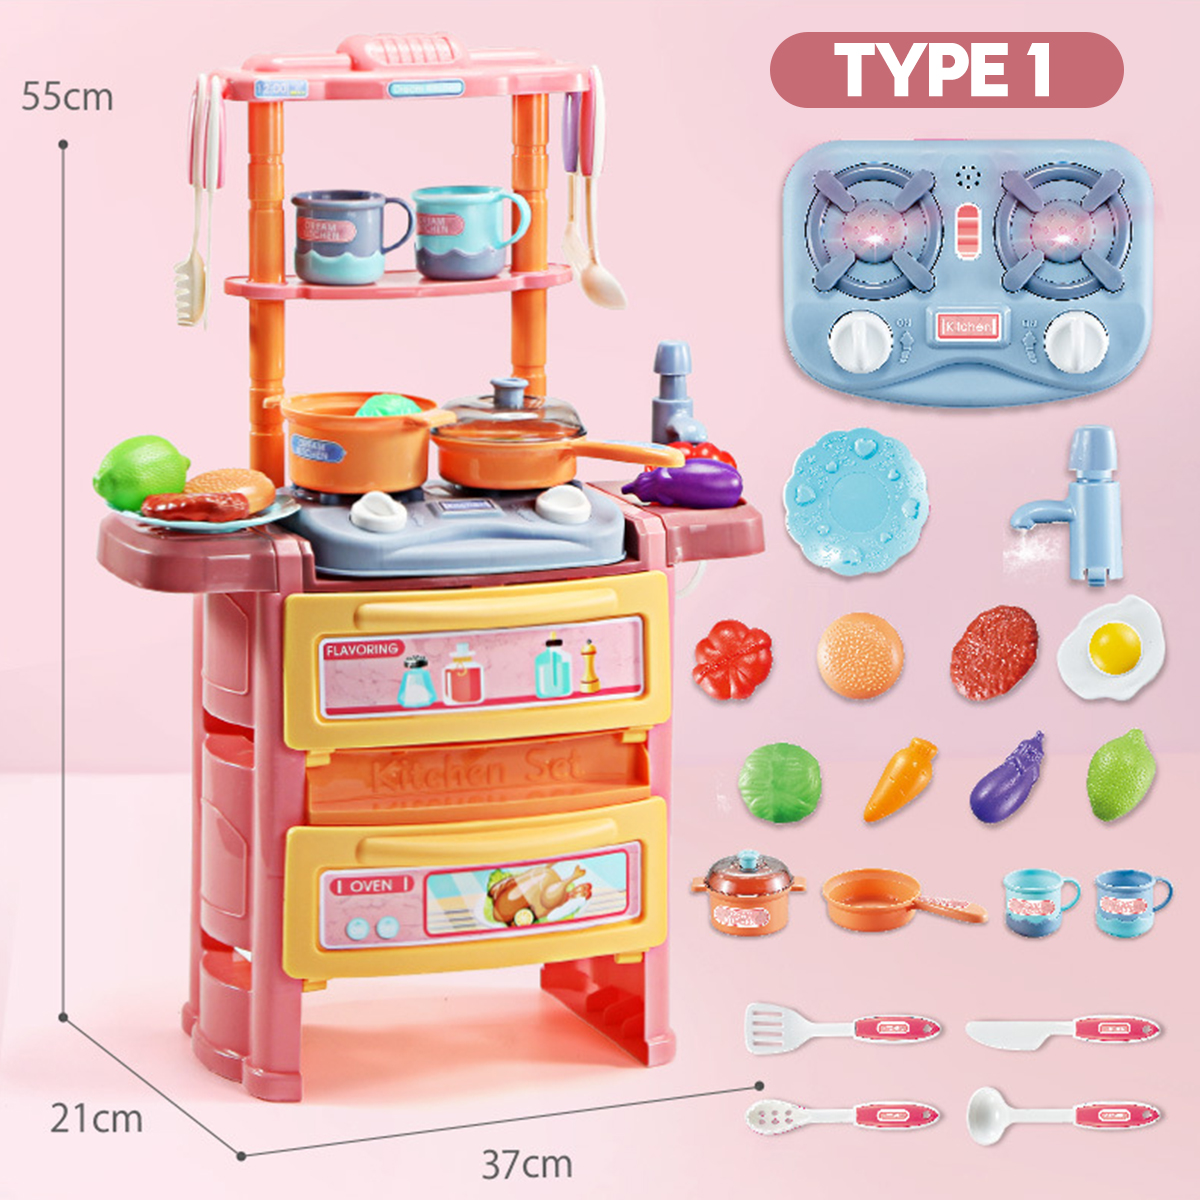 Dream-Kitchen-Role-Play-Cooking-Children-Tableware-Toys-Set-with-Sound-Light-Water-Outlet-Funtion-1678214-2